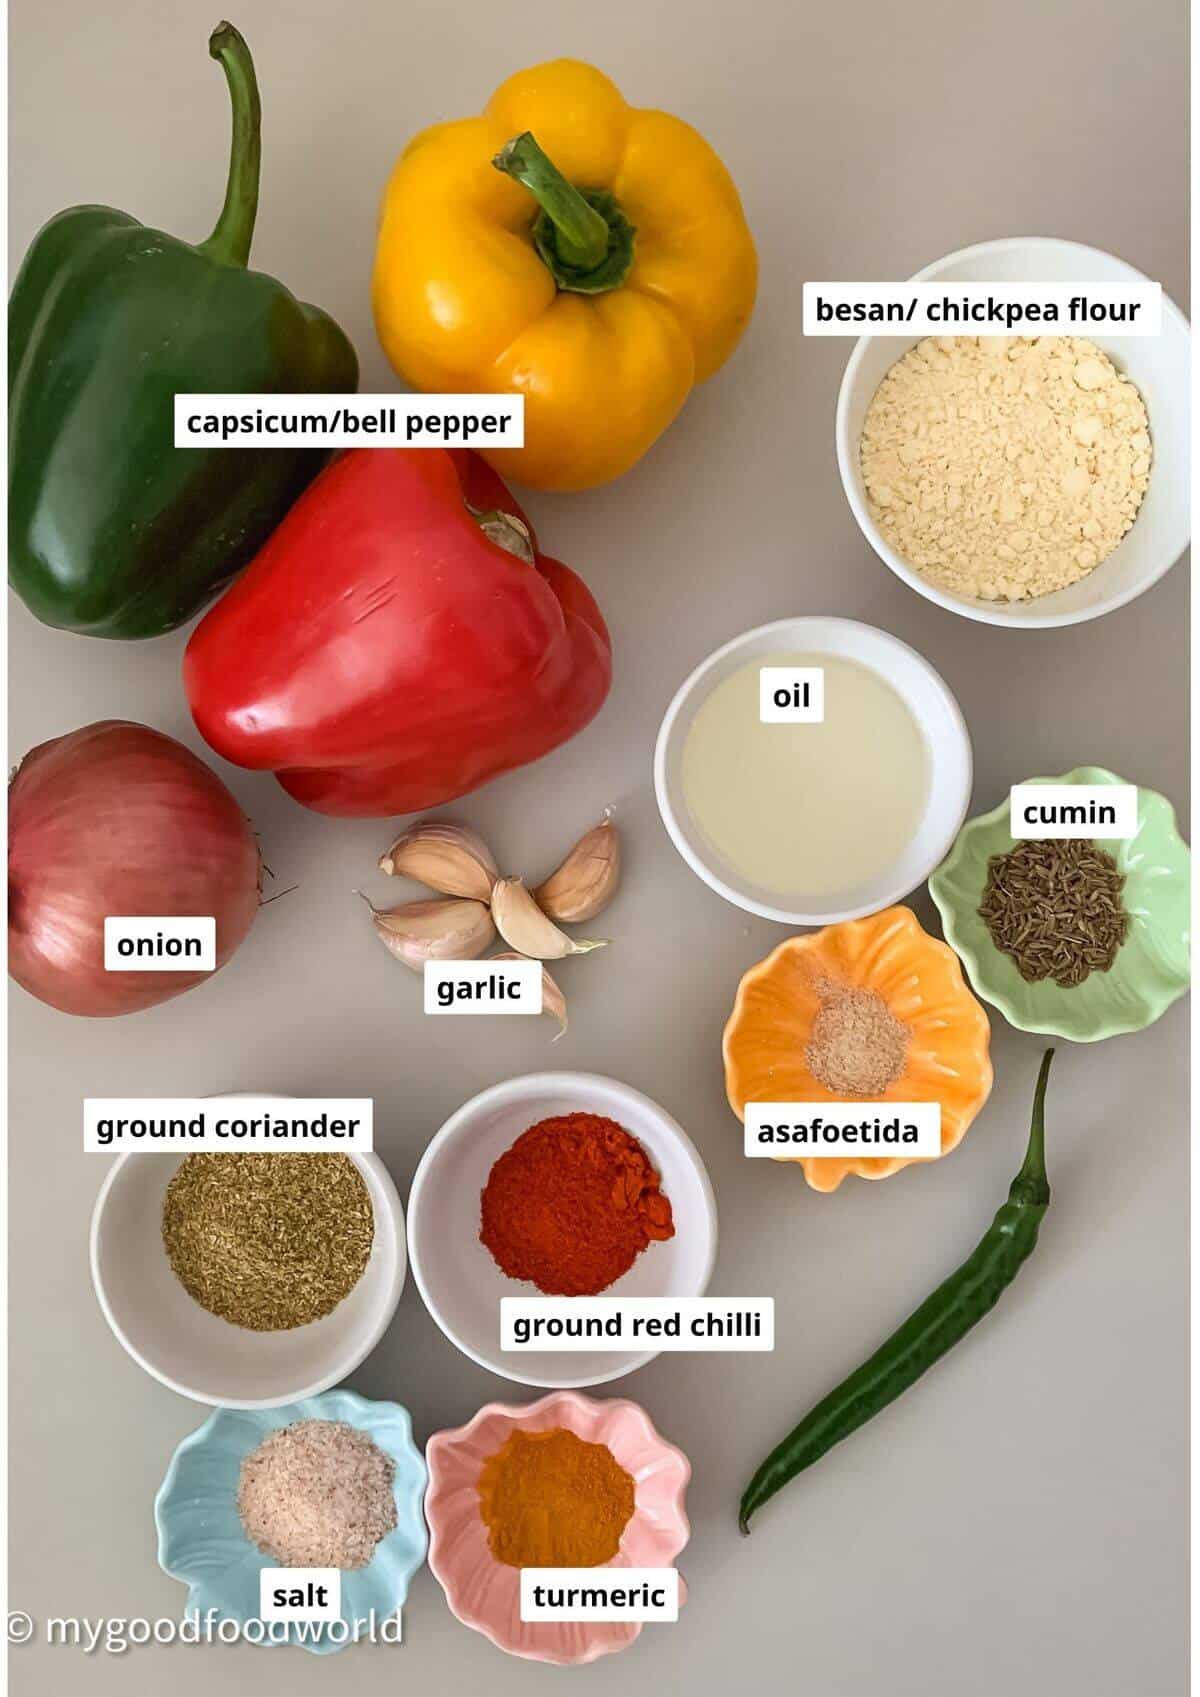 Ingredients for besan capsicum recipe such as tri colored bell peppers, gram flour, cumin seeds, chilli powder, and aromatics are placed on a light coloured background for a photo.